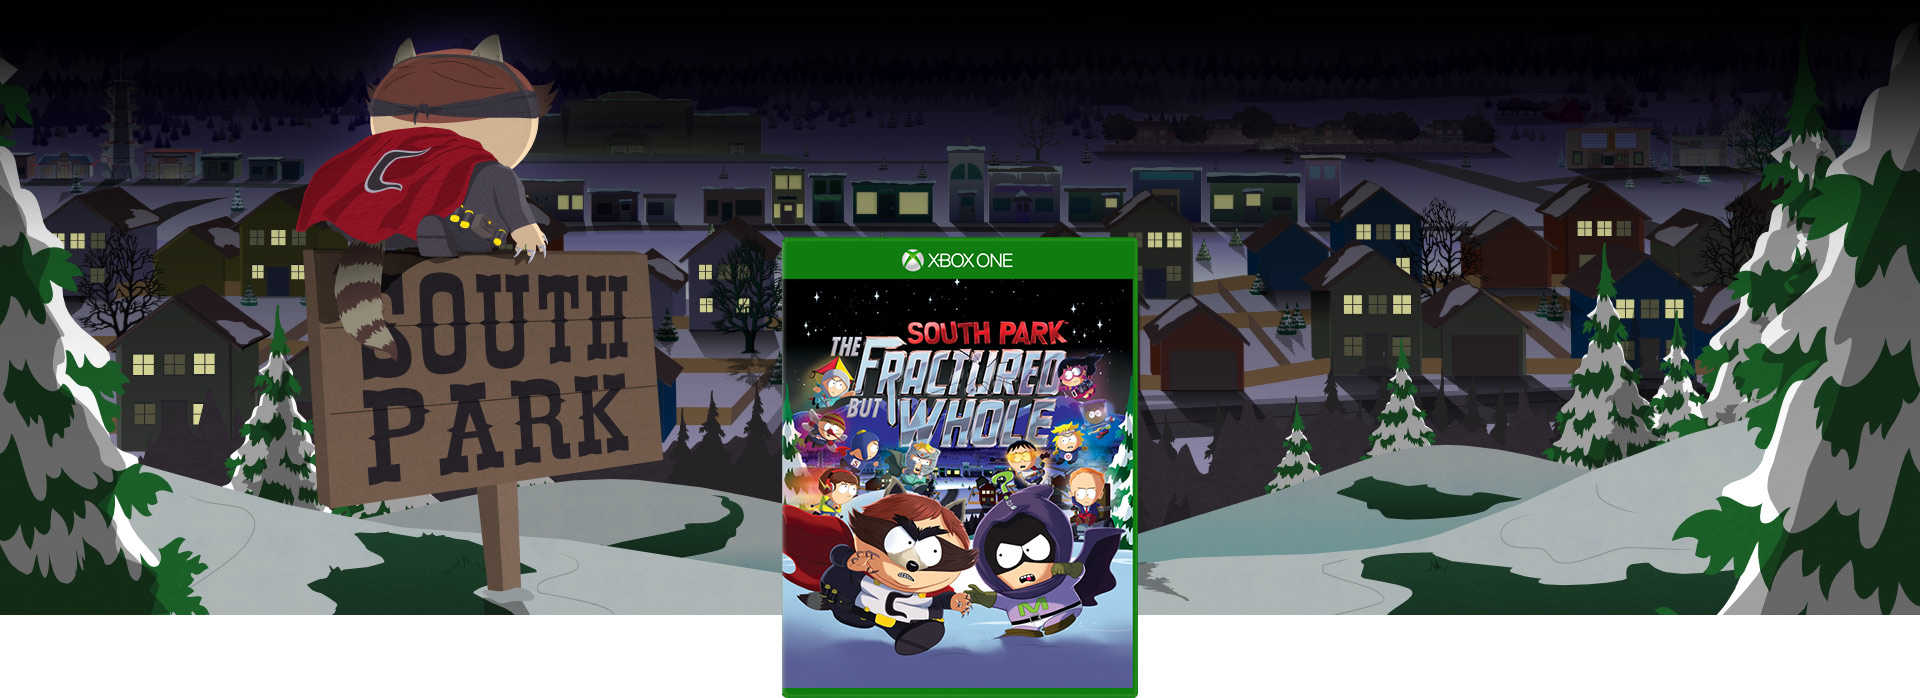 south park fractured but whole gender dialogue differences